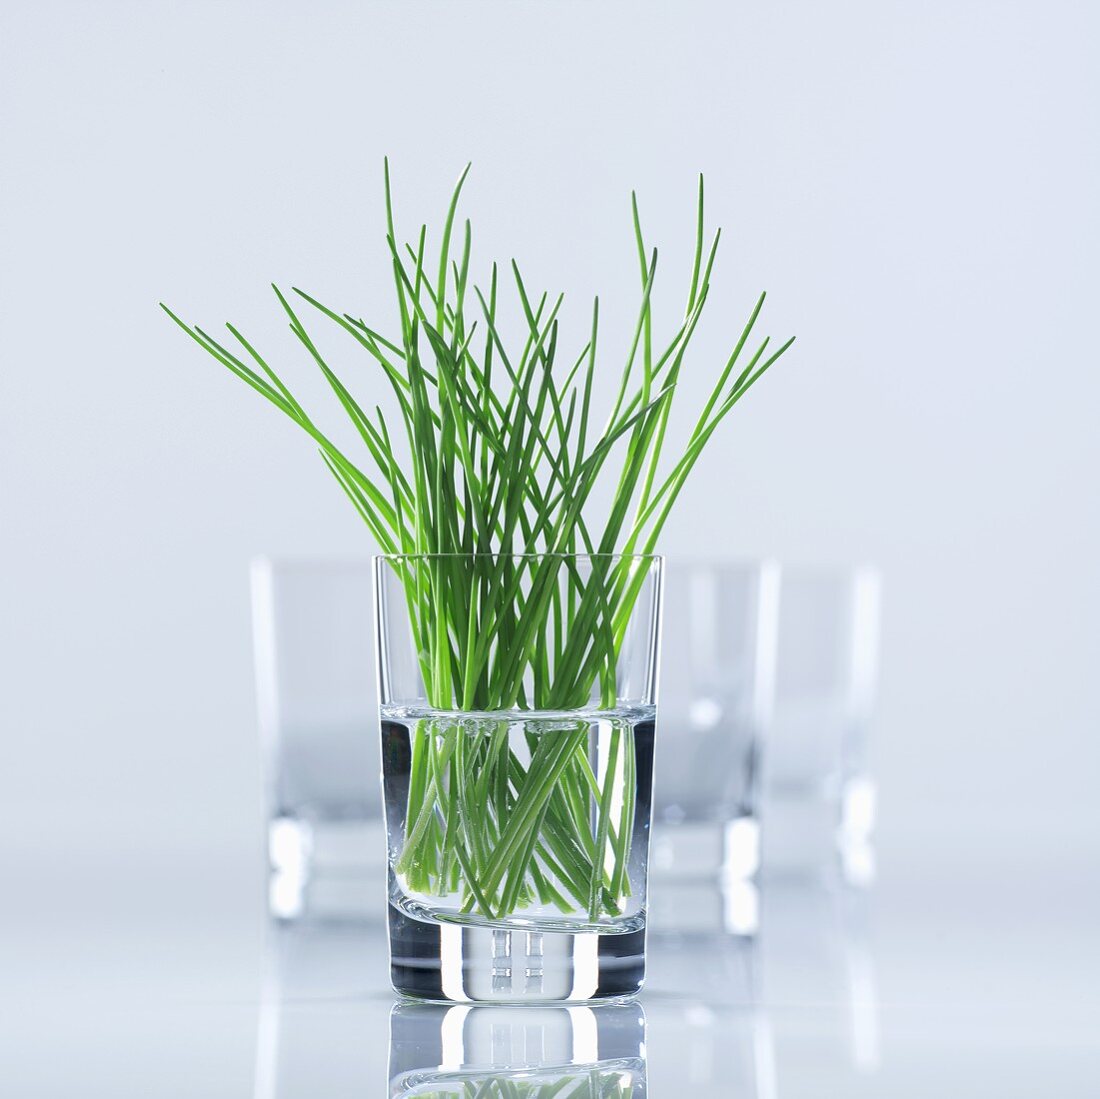 Chives in glass of water